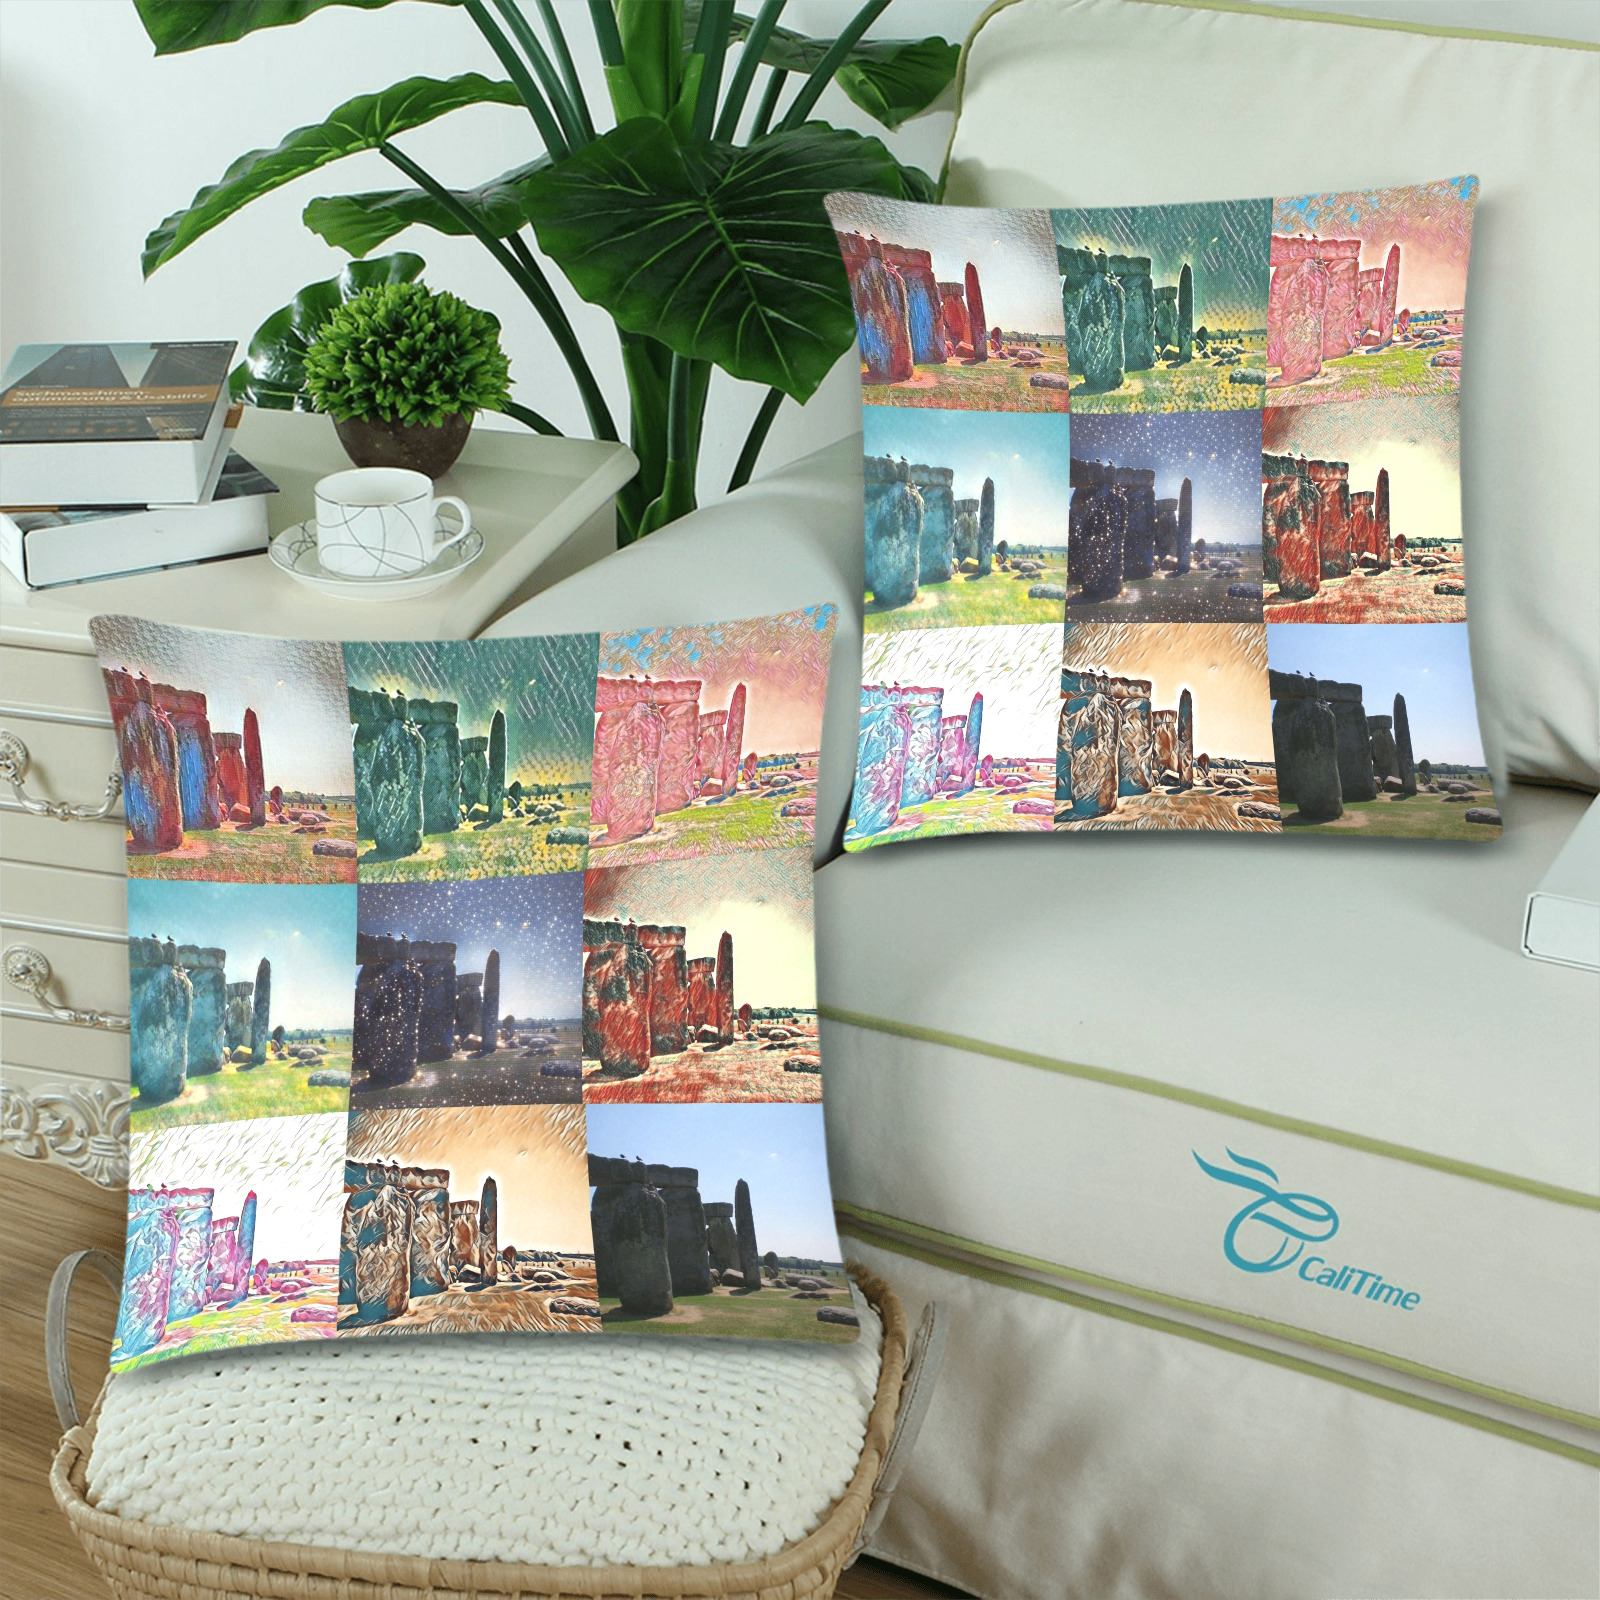 Stonehenge, Wiltshire, England Collage Custom Zippered Pillow Cases 18"x 18" (Twin Sides) (Set of 2)